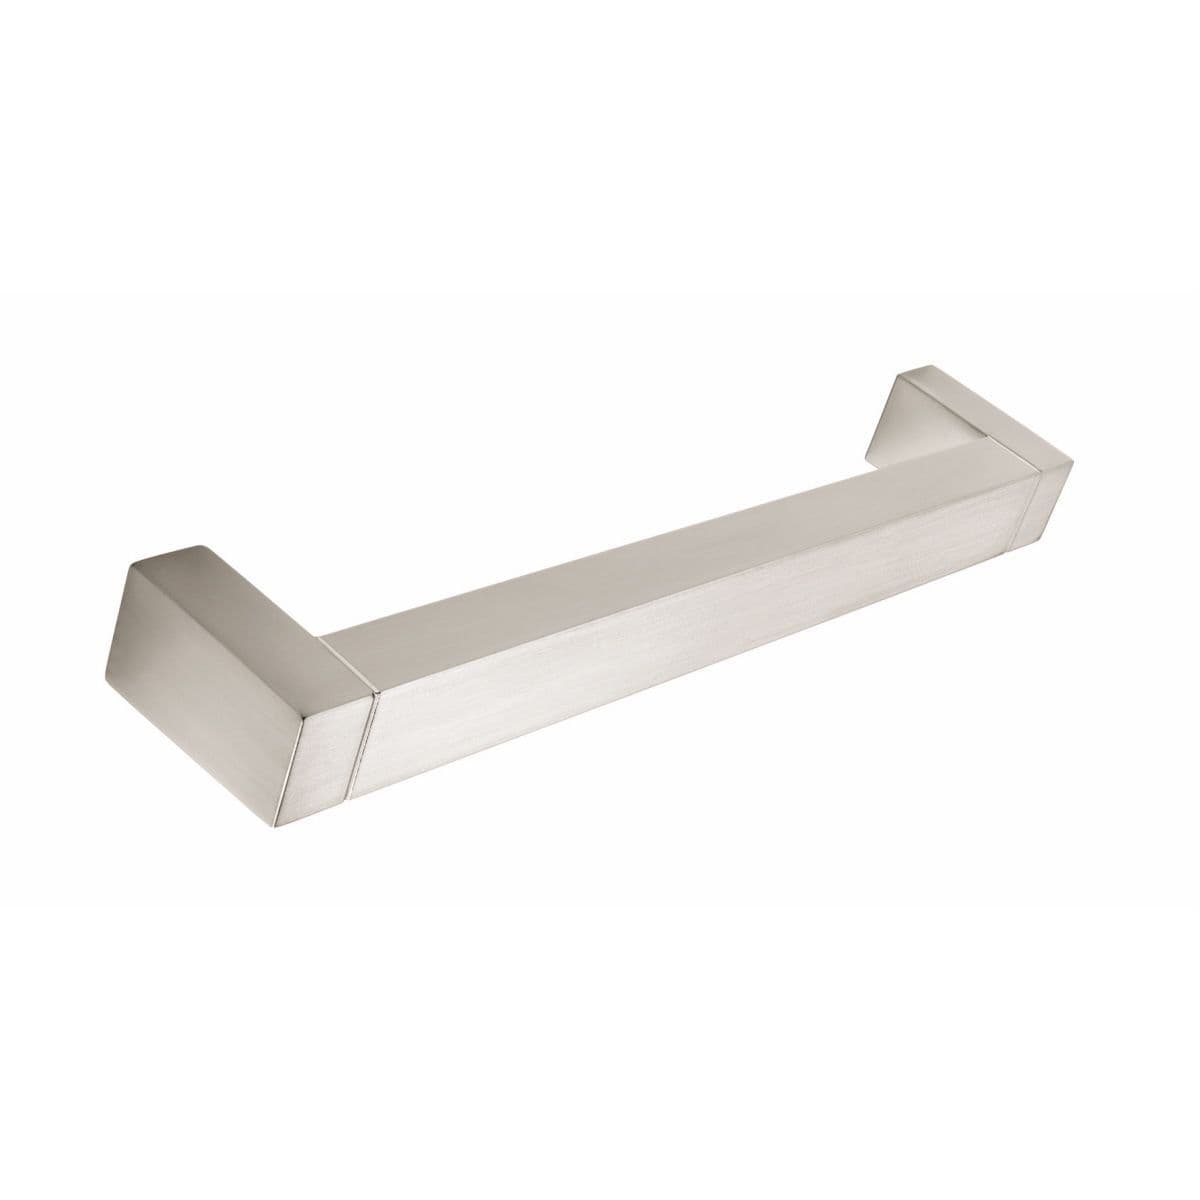 CLIFTON BAR Cupboard Handle - 2 sizes - BRUSHED STAINLESS STEEL EFFECT finish (PWS H536/H539.SS)